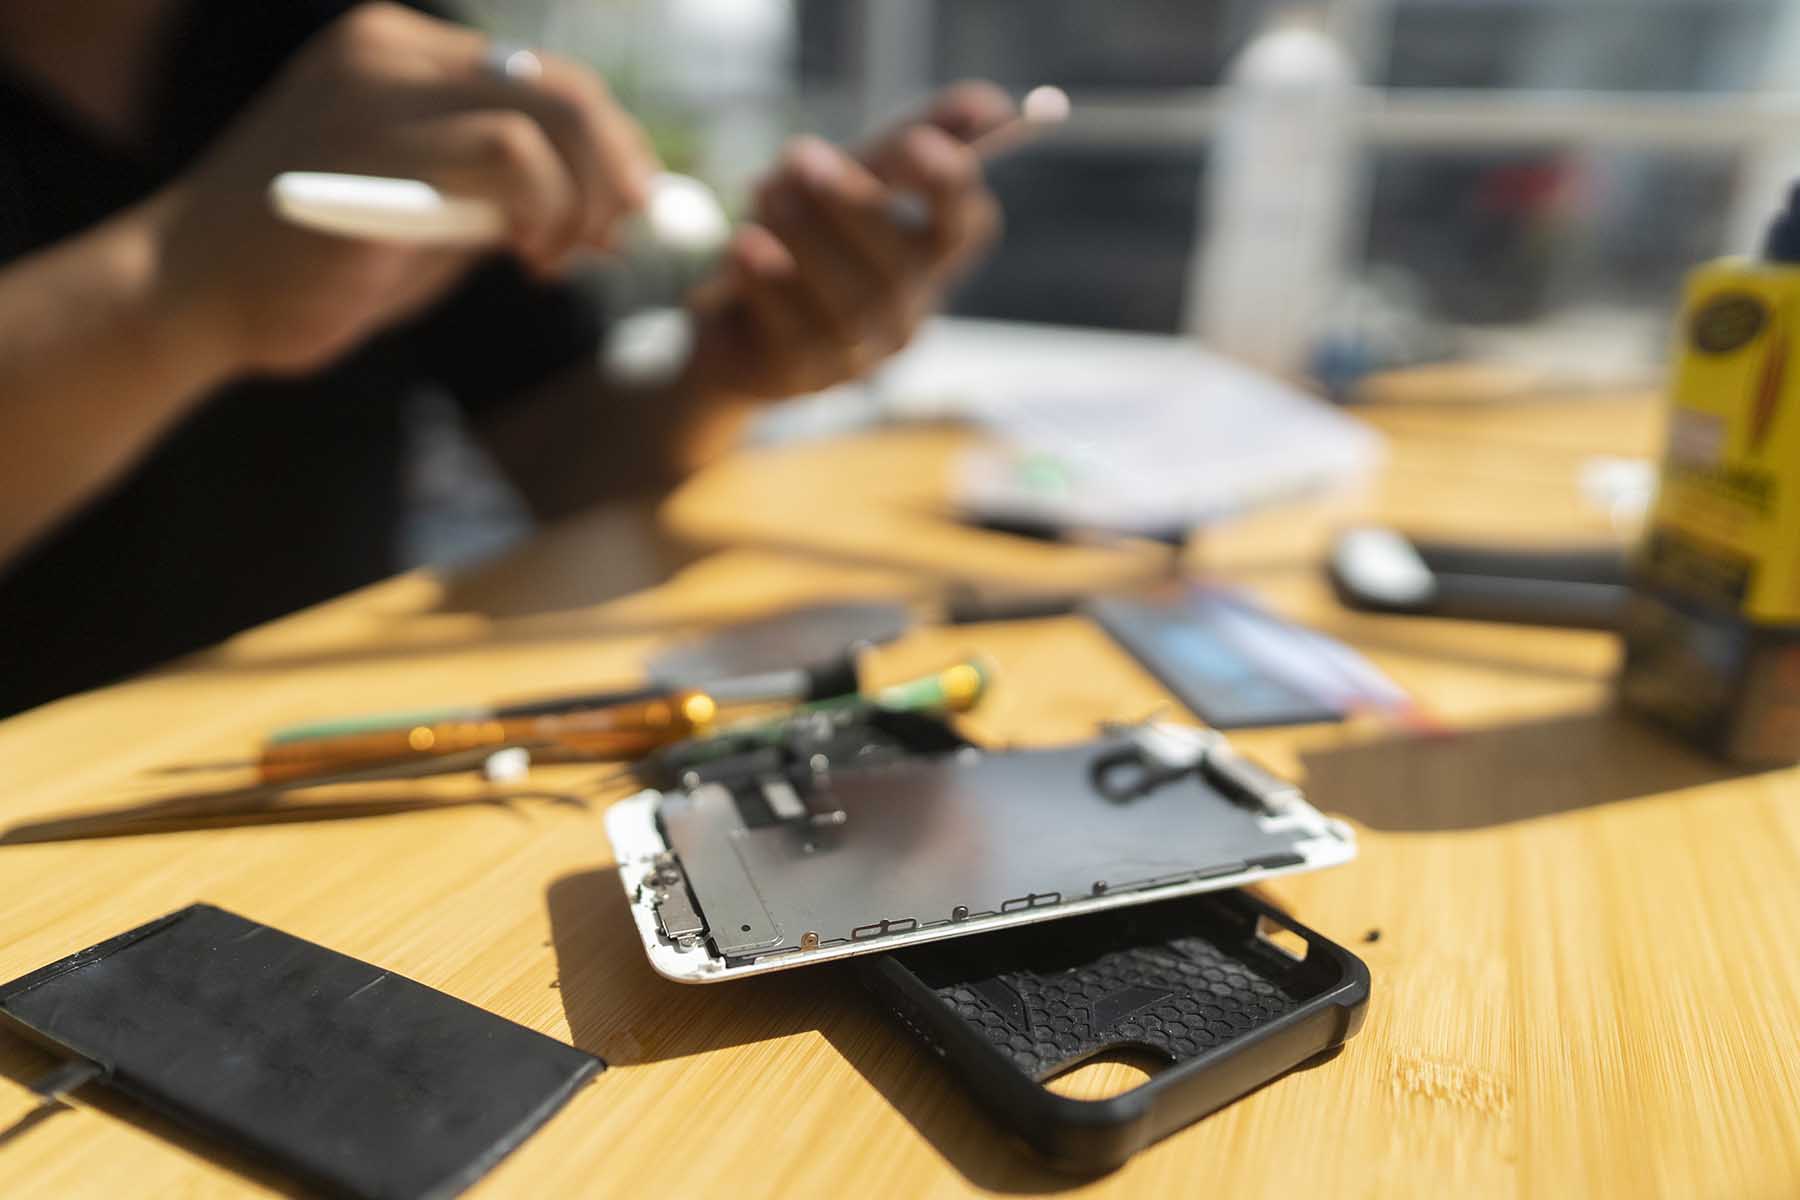 Close up of a mobile phone being repaired.